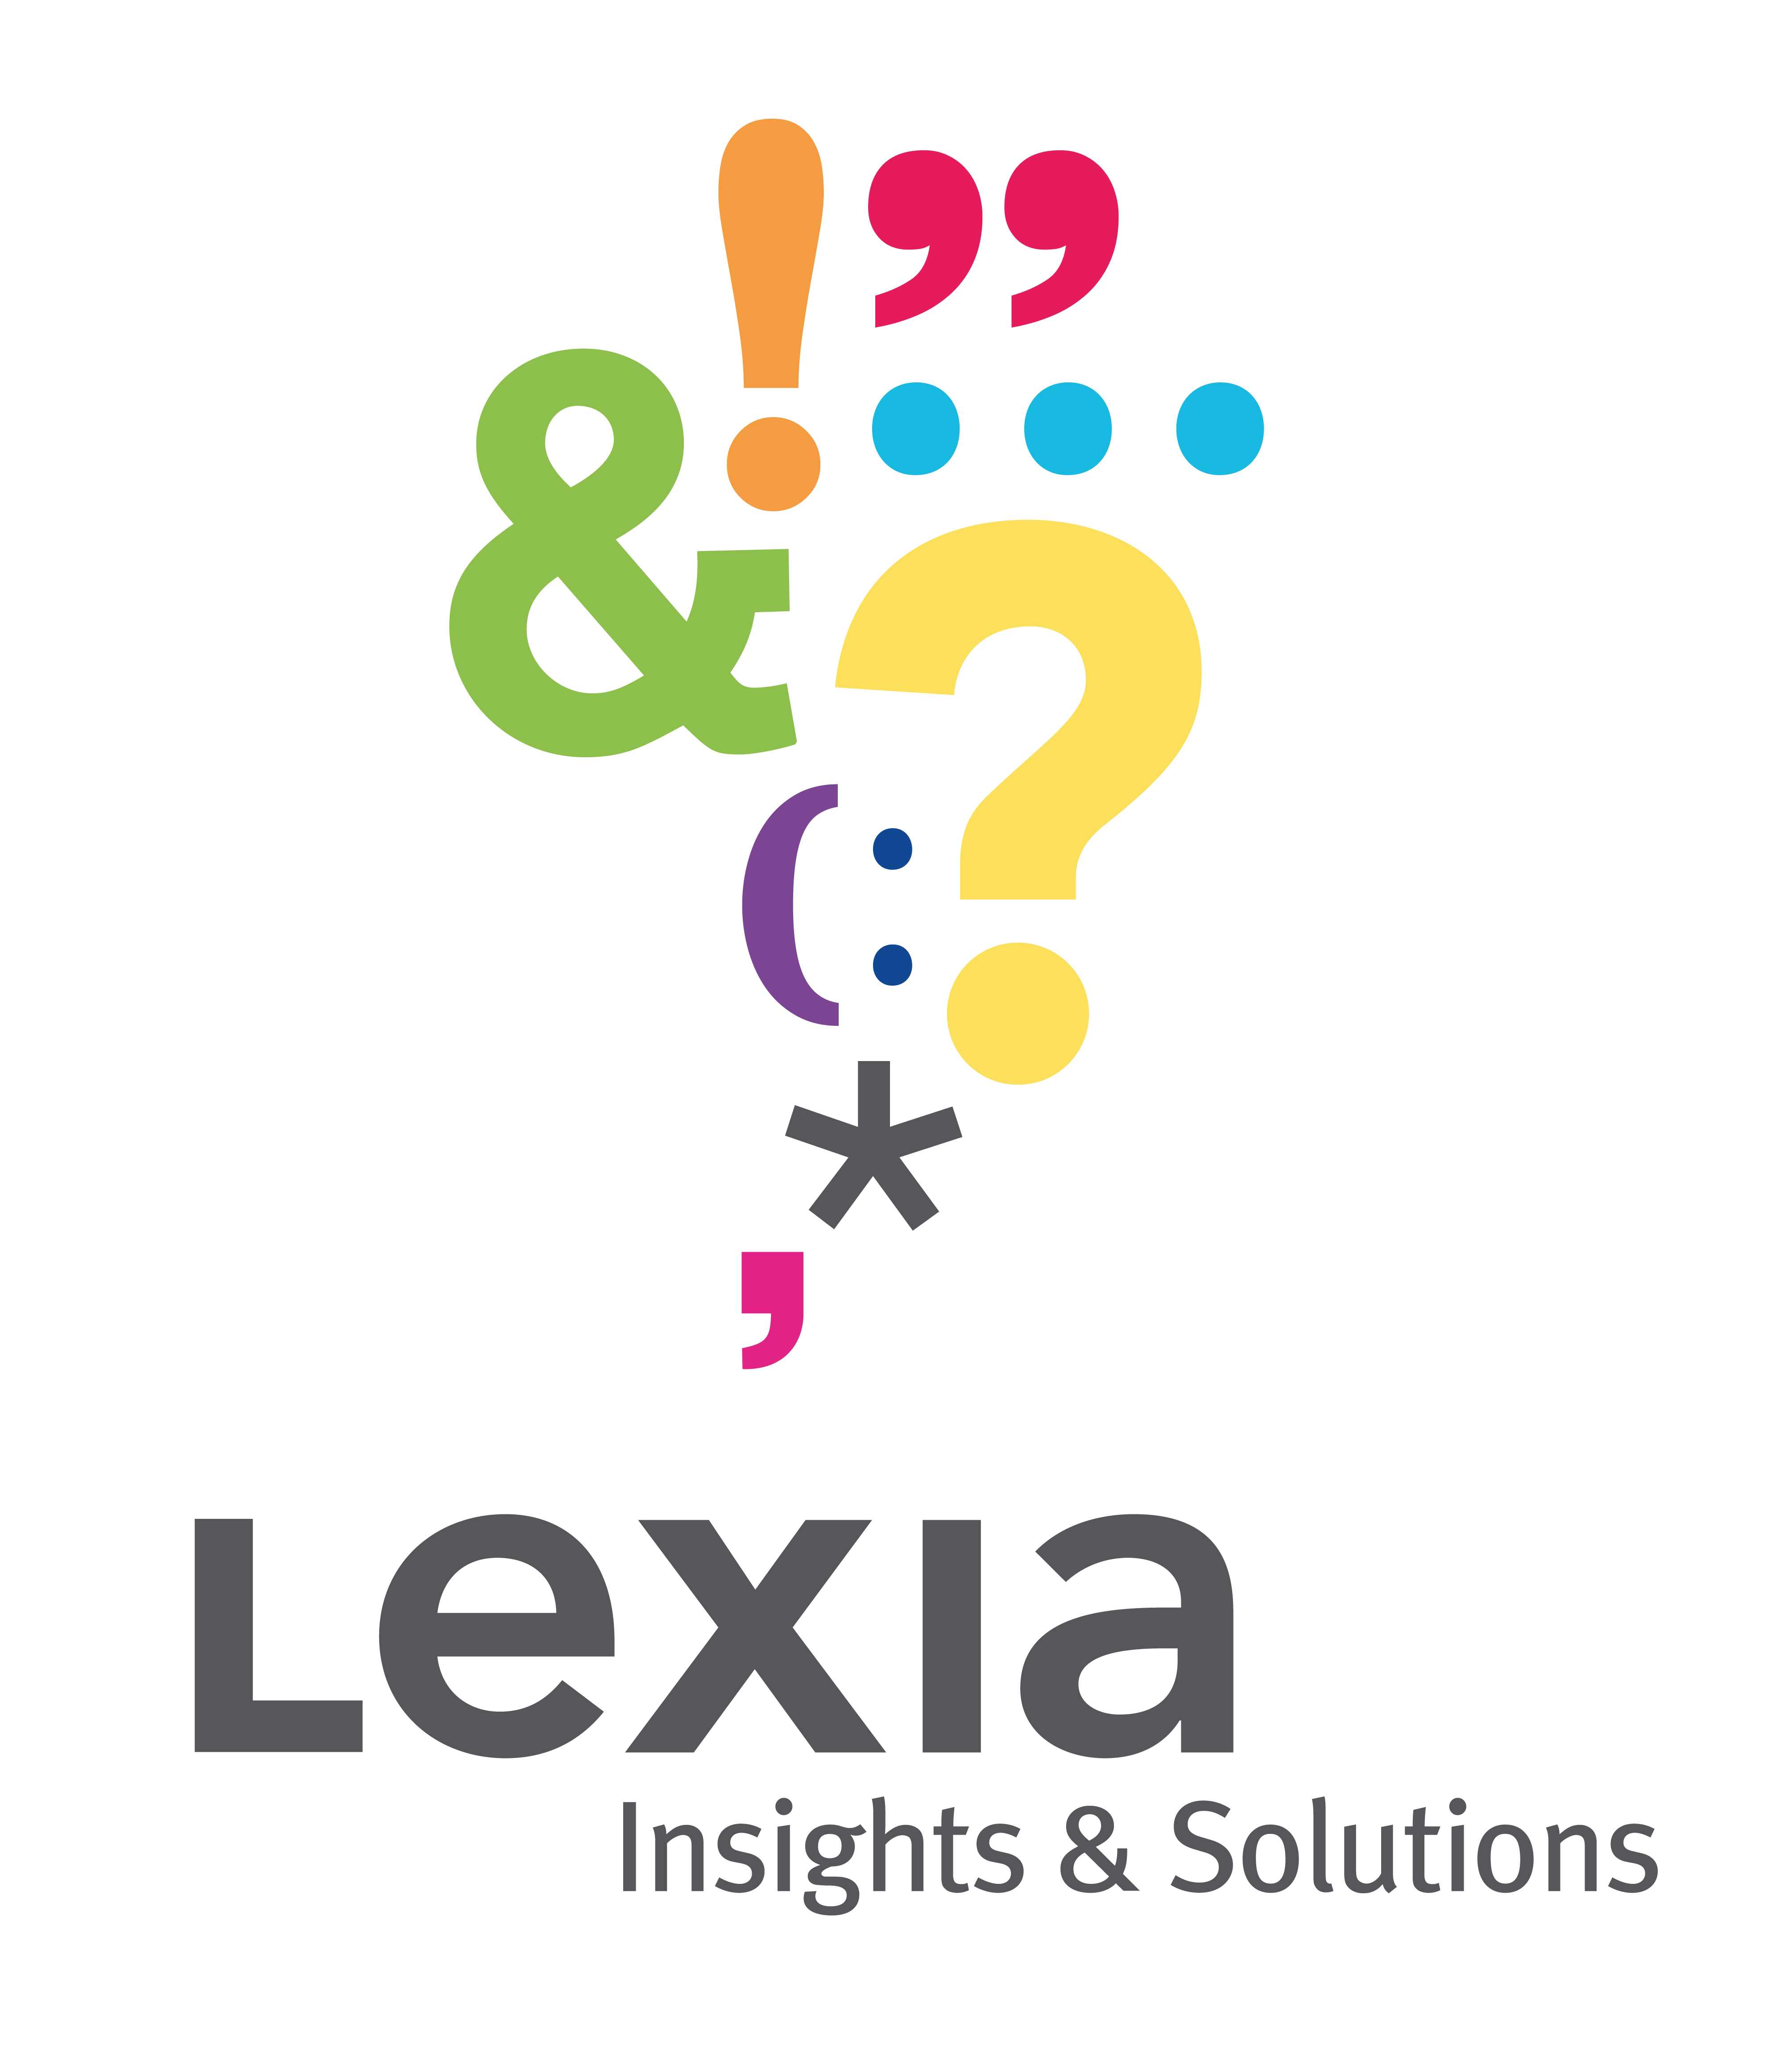 LEXIA Insights & Solutions